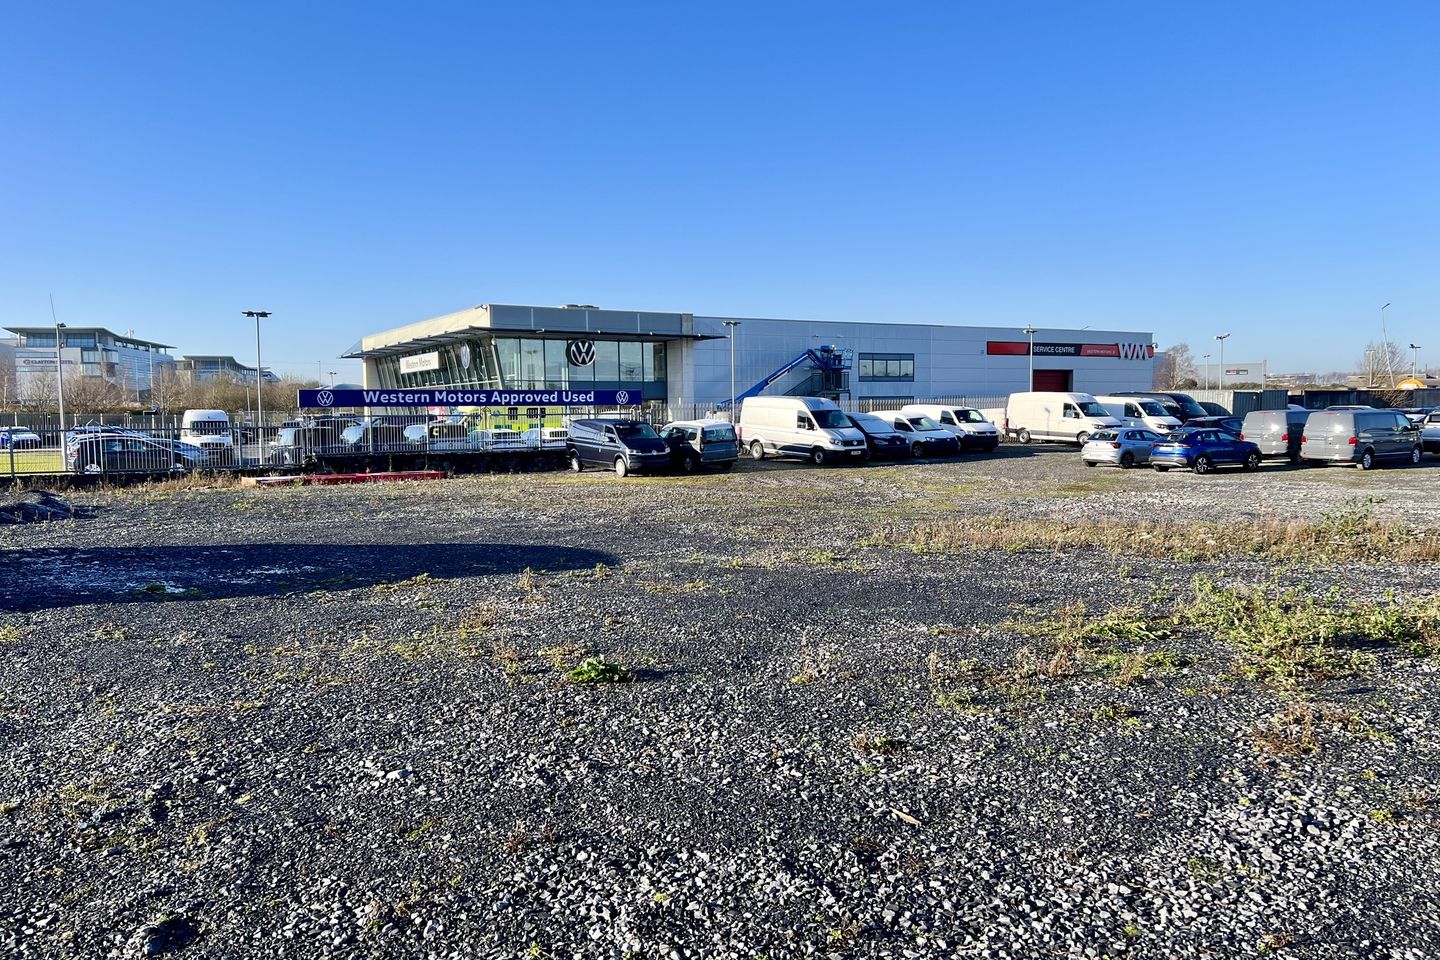 Briarhill Business Park, Ballybrit, Galway City, Co. Galway